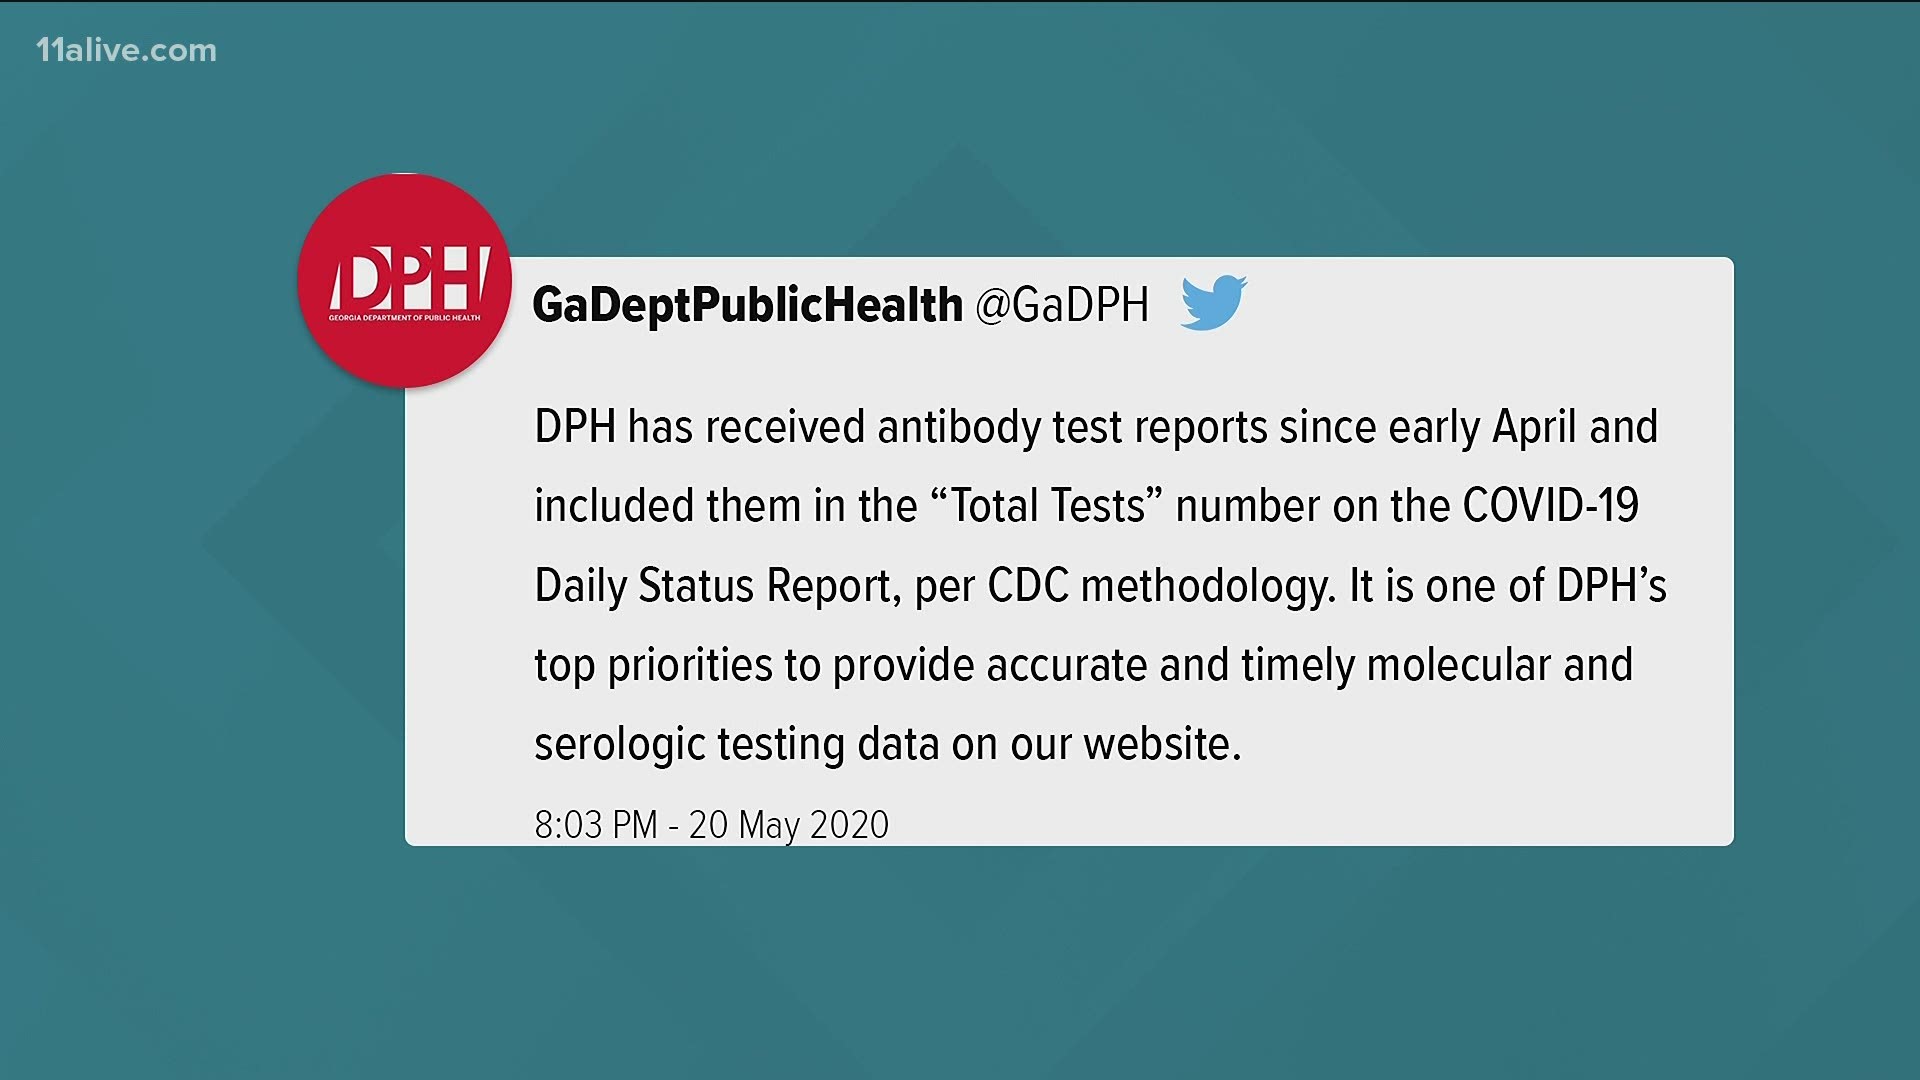 On Wednesday, 11Alive learned that overall COVID-19 testing data for the state of Georgia now includes two different types of tests.